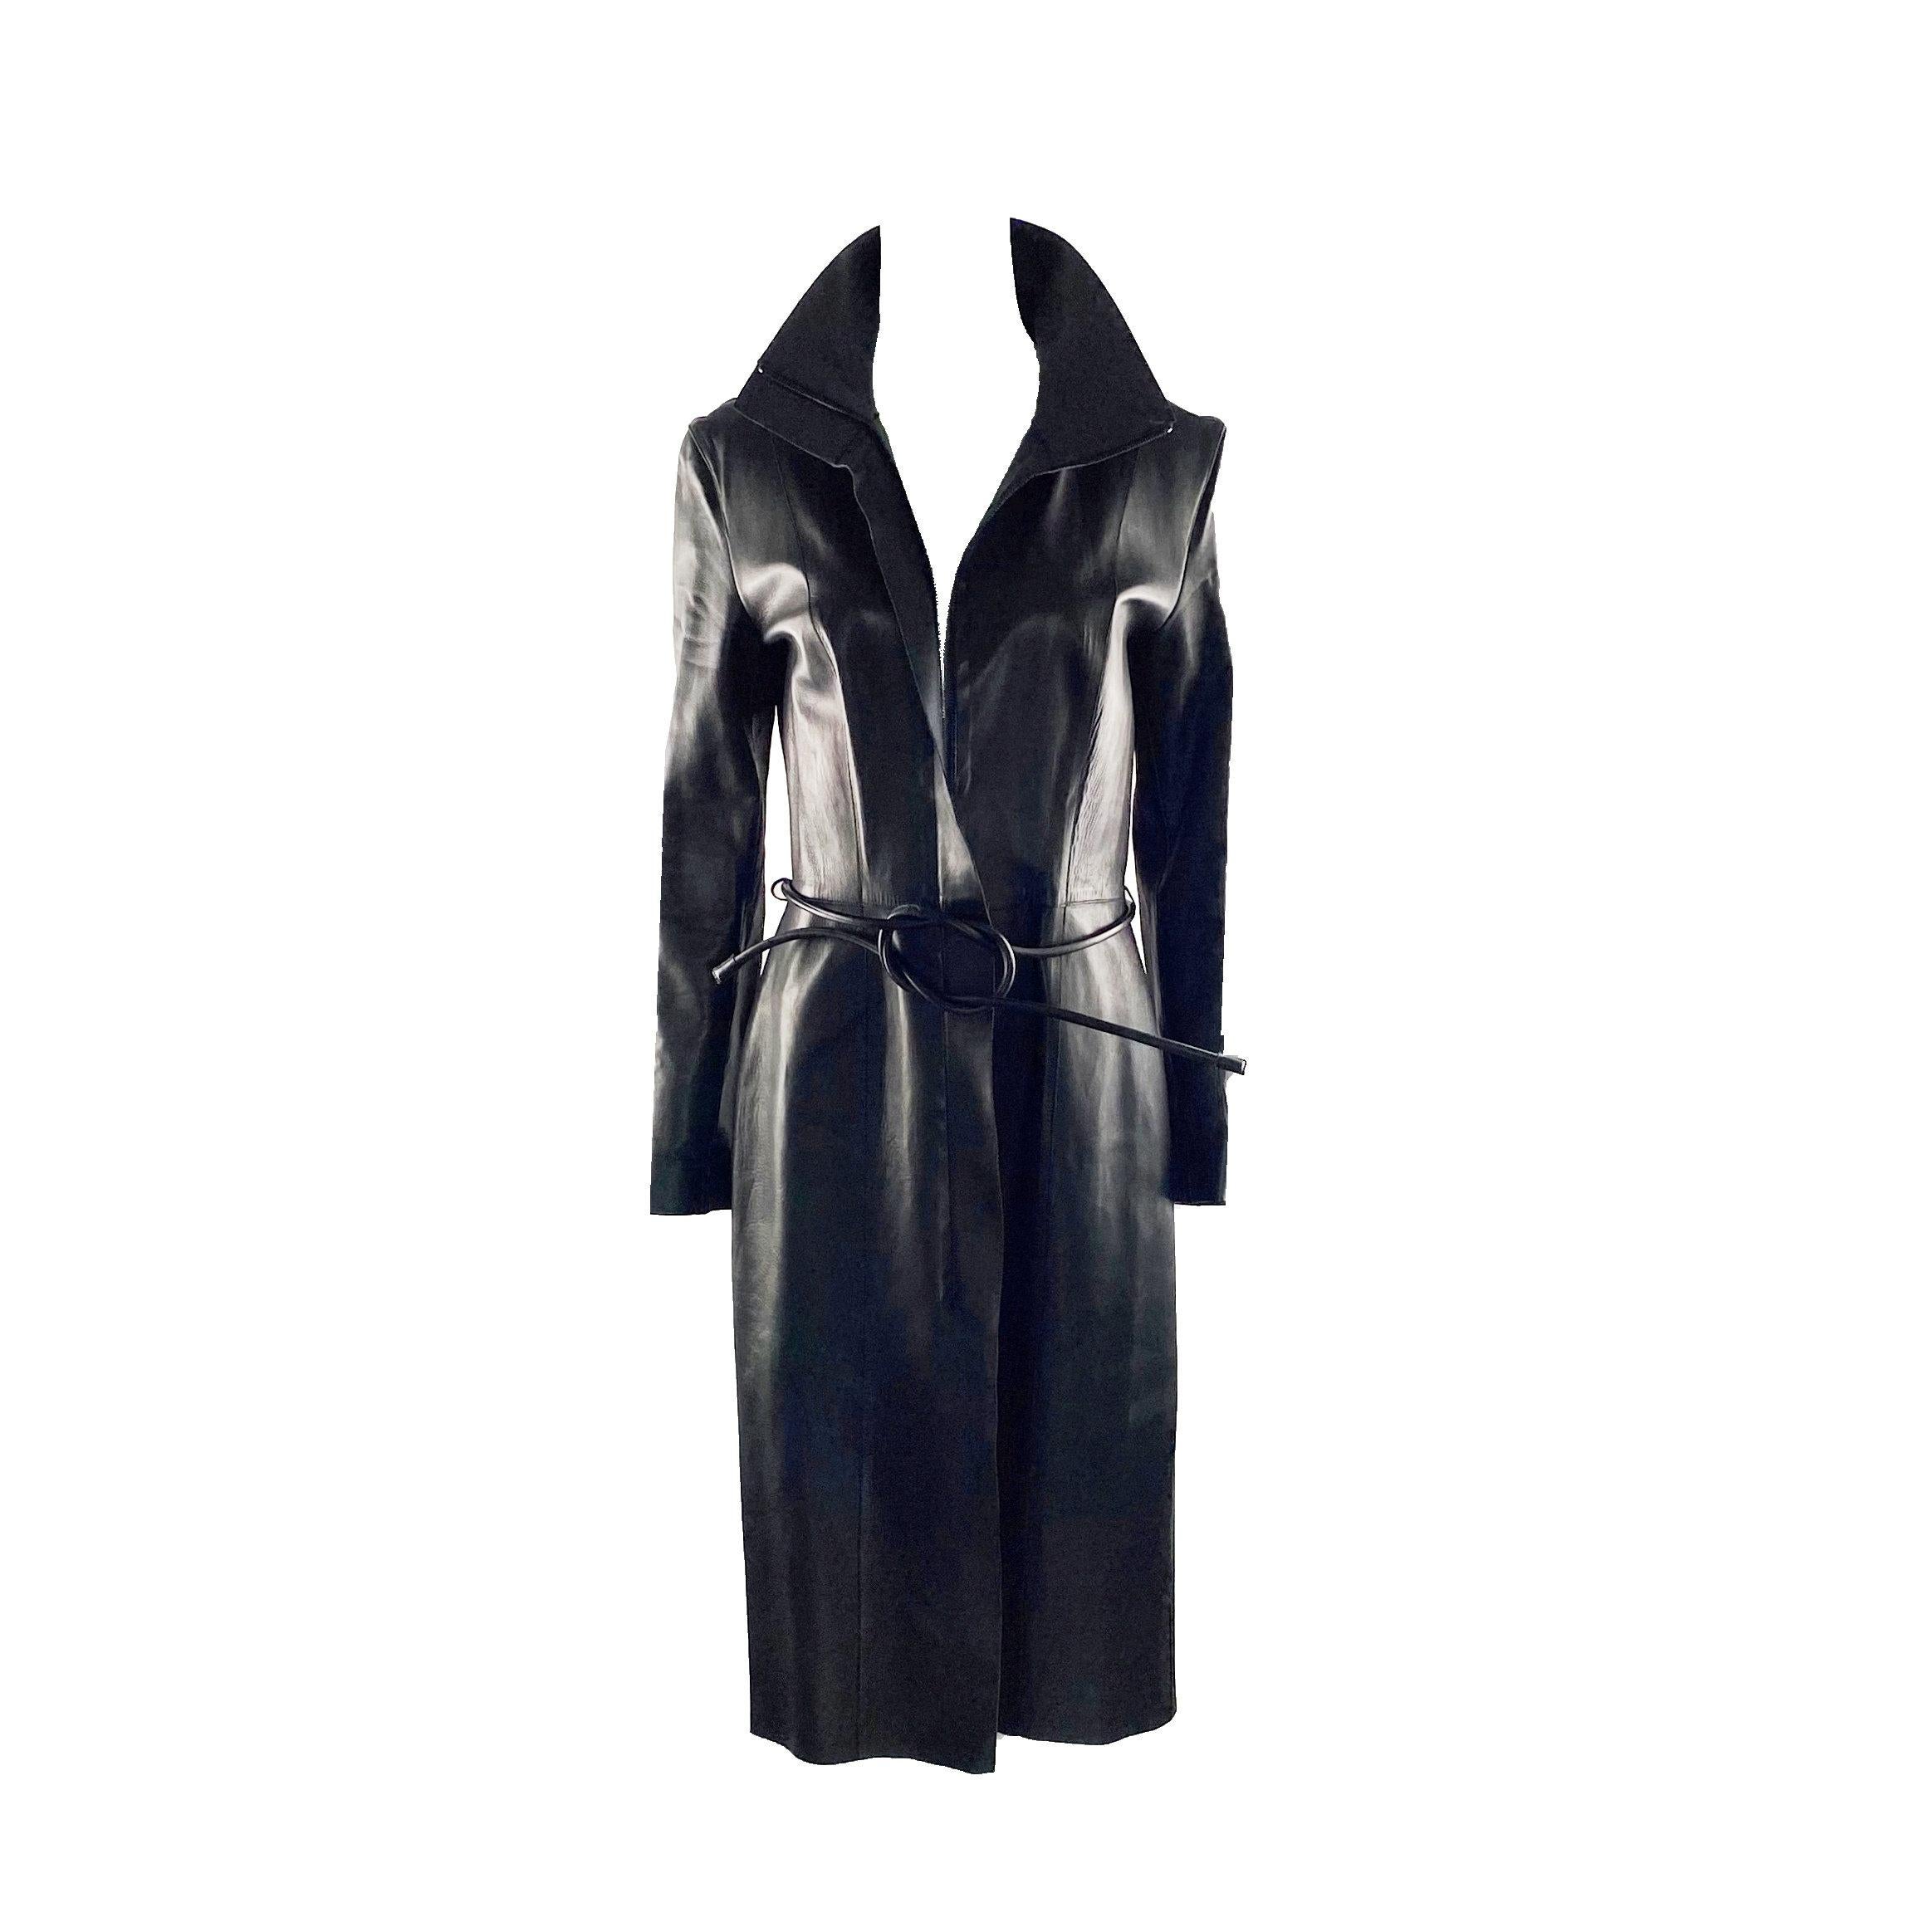 
Gorgeous Black Leather Coat by Tom Ford for GUCCI
Created for his iconic  1999 F/W collection for Gucci

Beautiful GUCCI by Tom Ford leather coat
A true collector's piece - almost impossible to find!
FW 1999 runway collection
A GUCCI